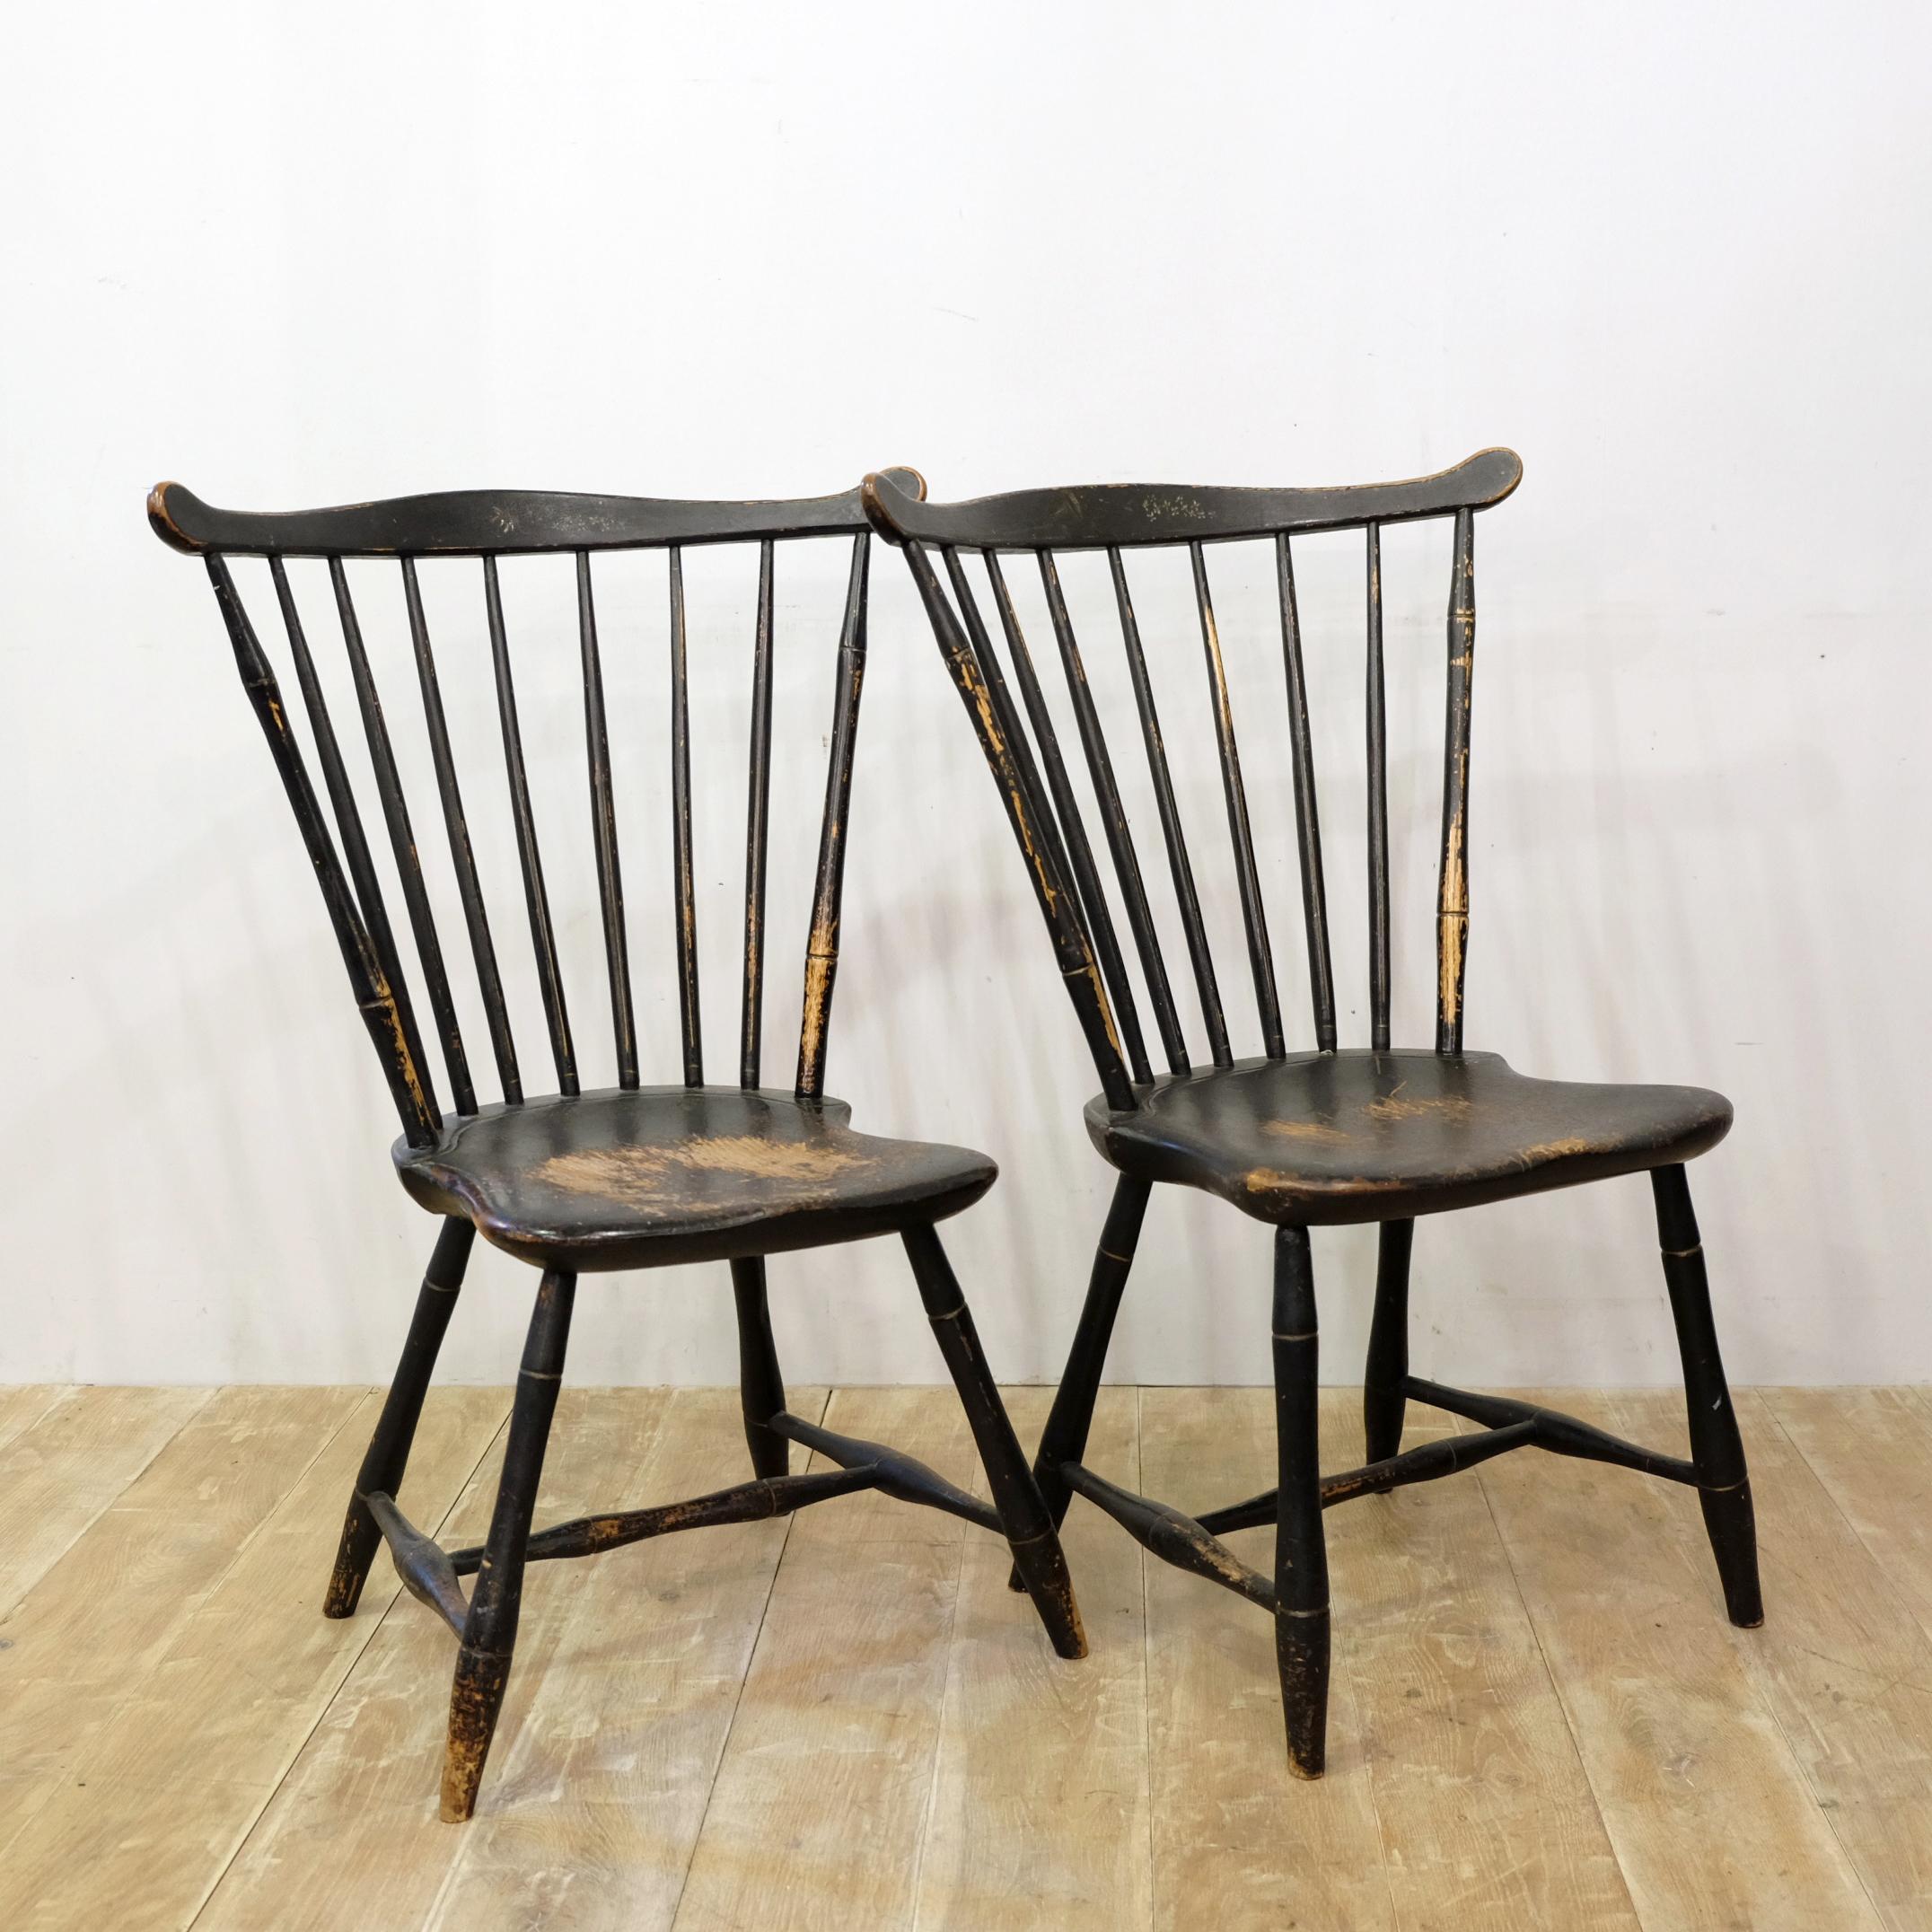 An important near pair of American comb back Windsor chairs in 19th century paint. Likely from the East Connecticut or Rhode Island area of New England, they date to circa 1780. Faux bamboo legs with turned H stretchers supporting shield-shaped